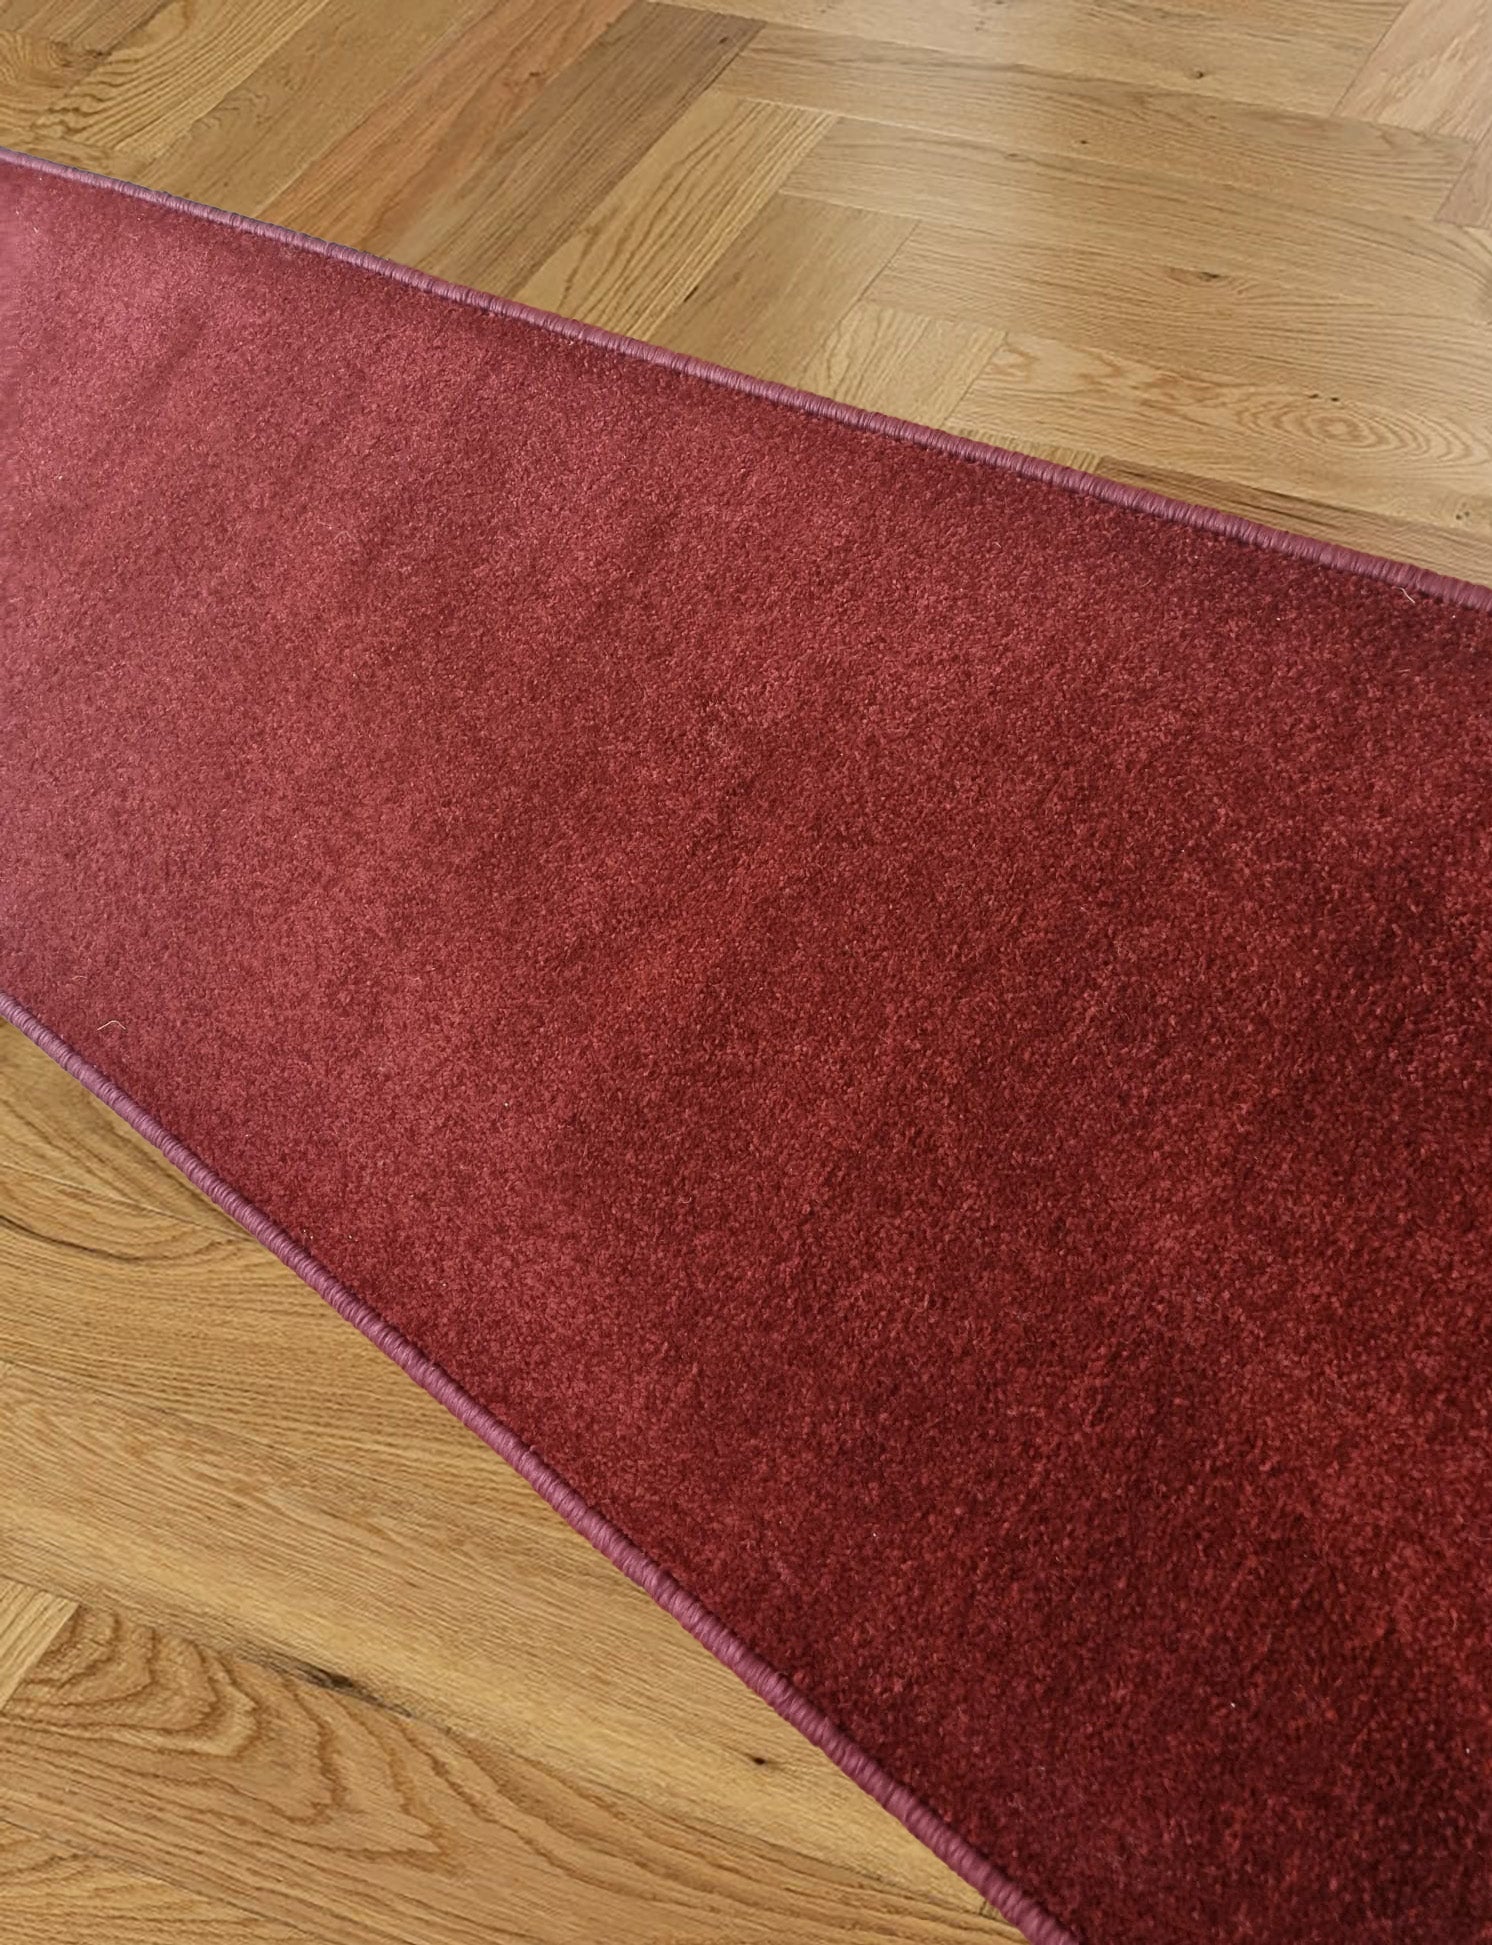 Royal red carpet runner rug, very high quality, hand-made carpet, stain resistant